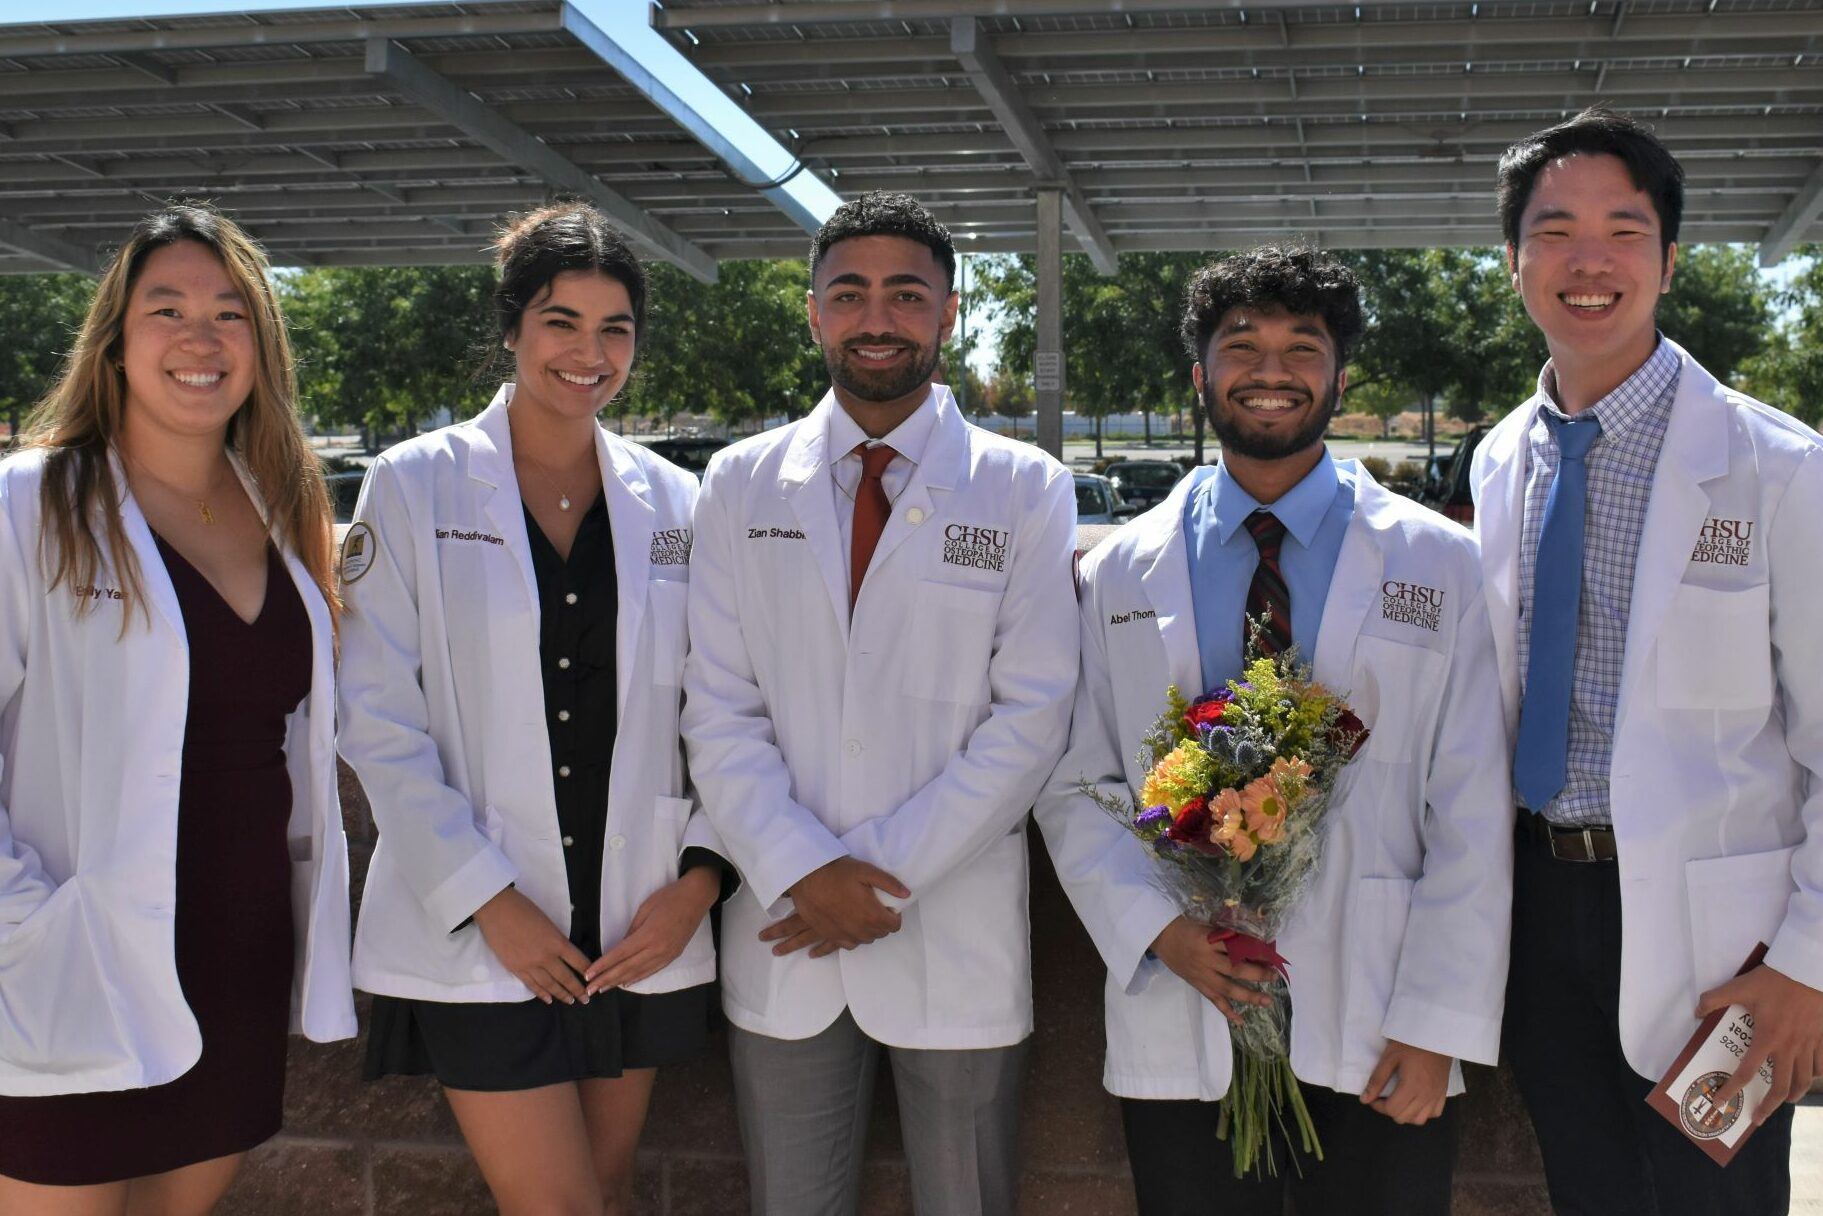 Students in white coats posing for camera